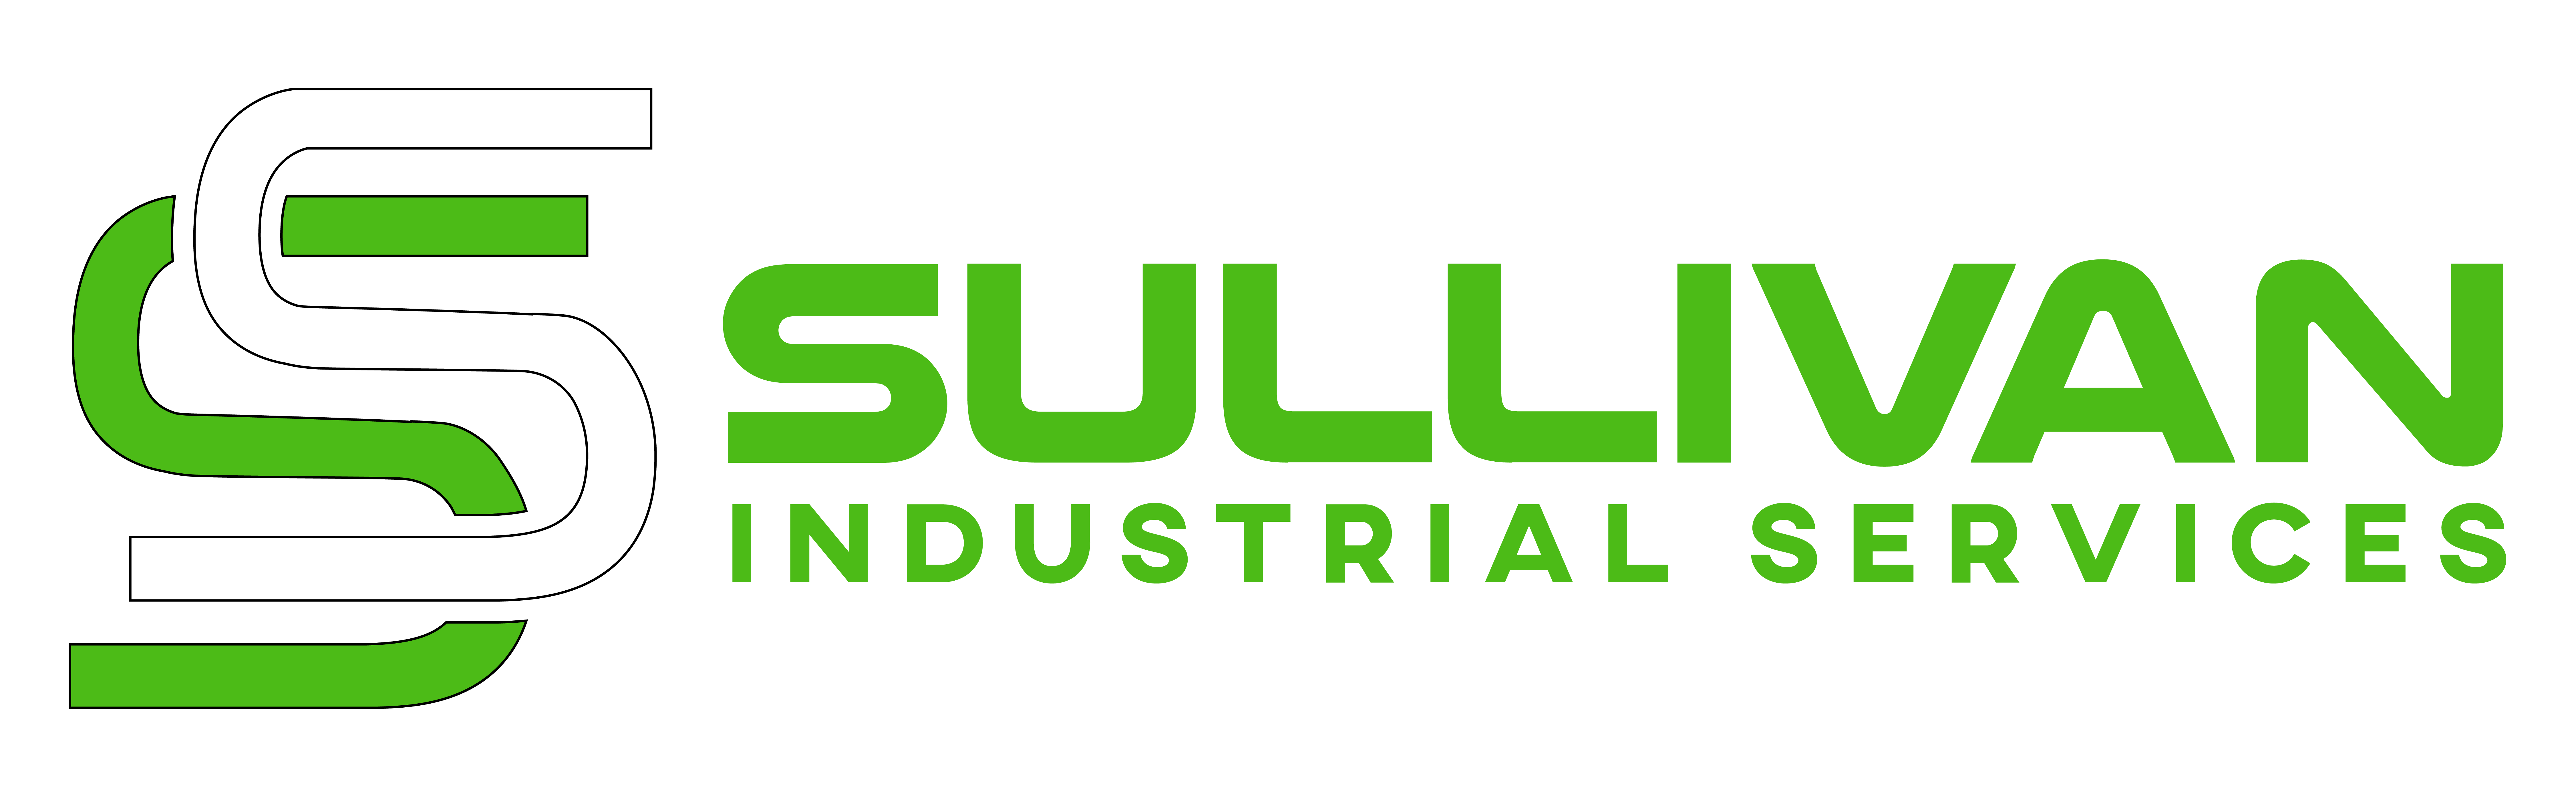 A Green S and a White S followed by the Text Sullivan industrial services